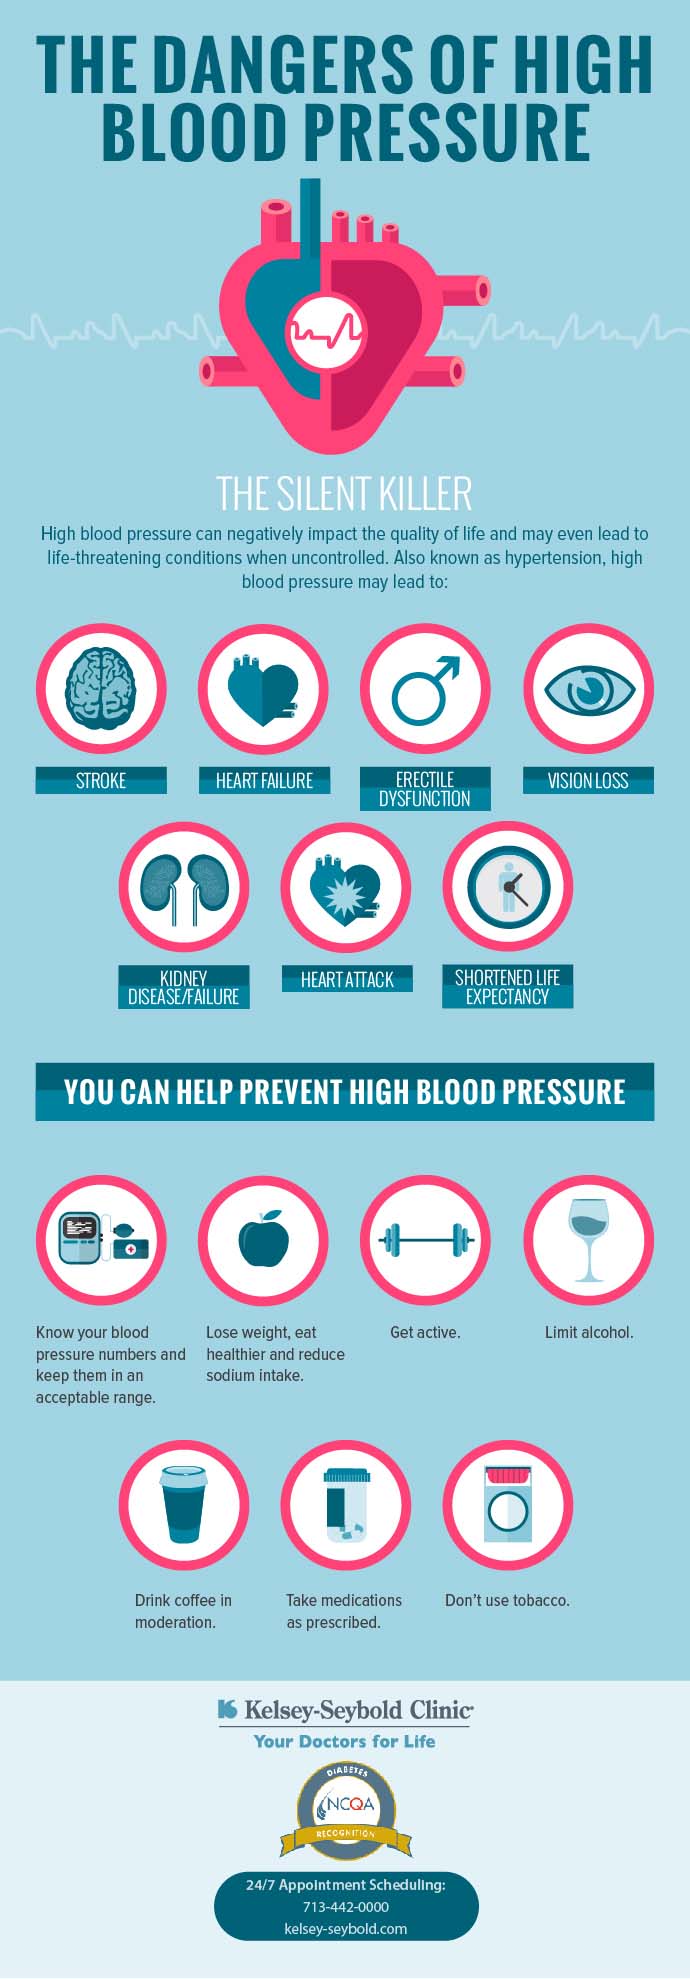 The dangers of high blood pressure infographic